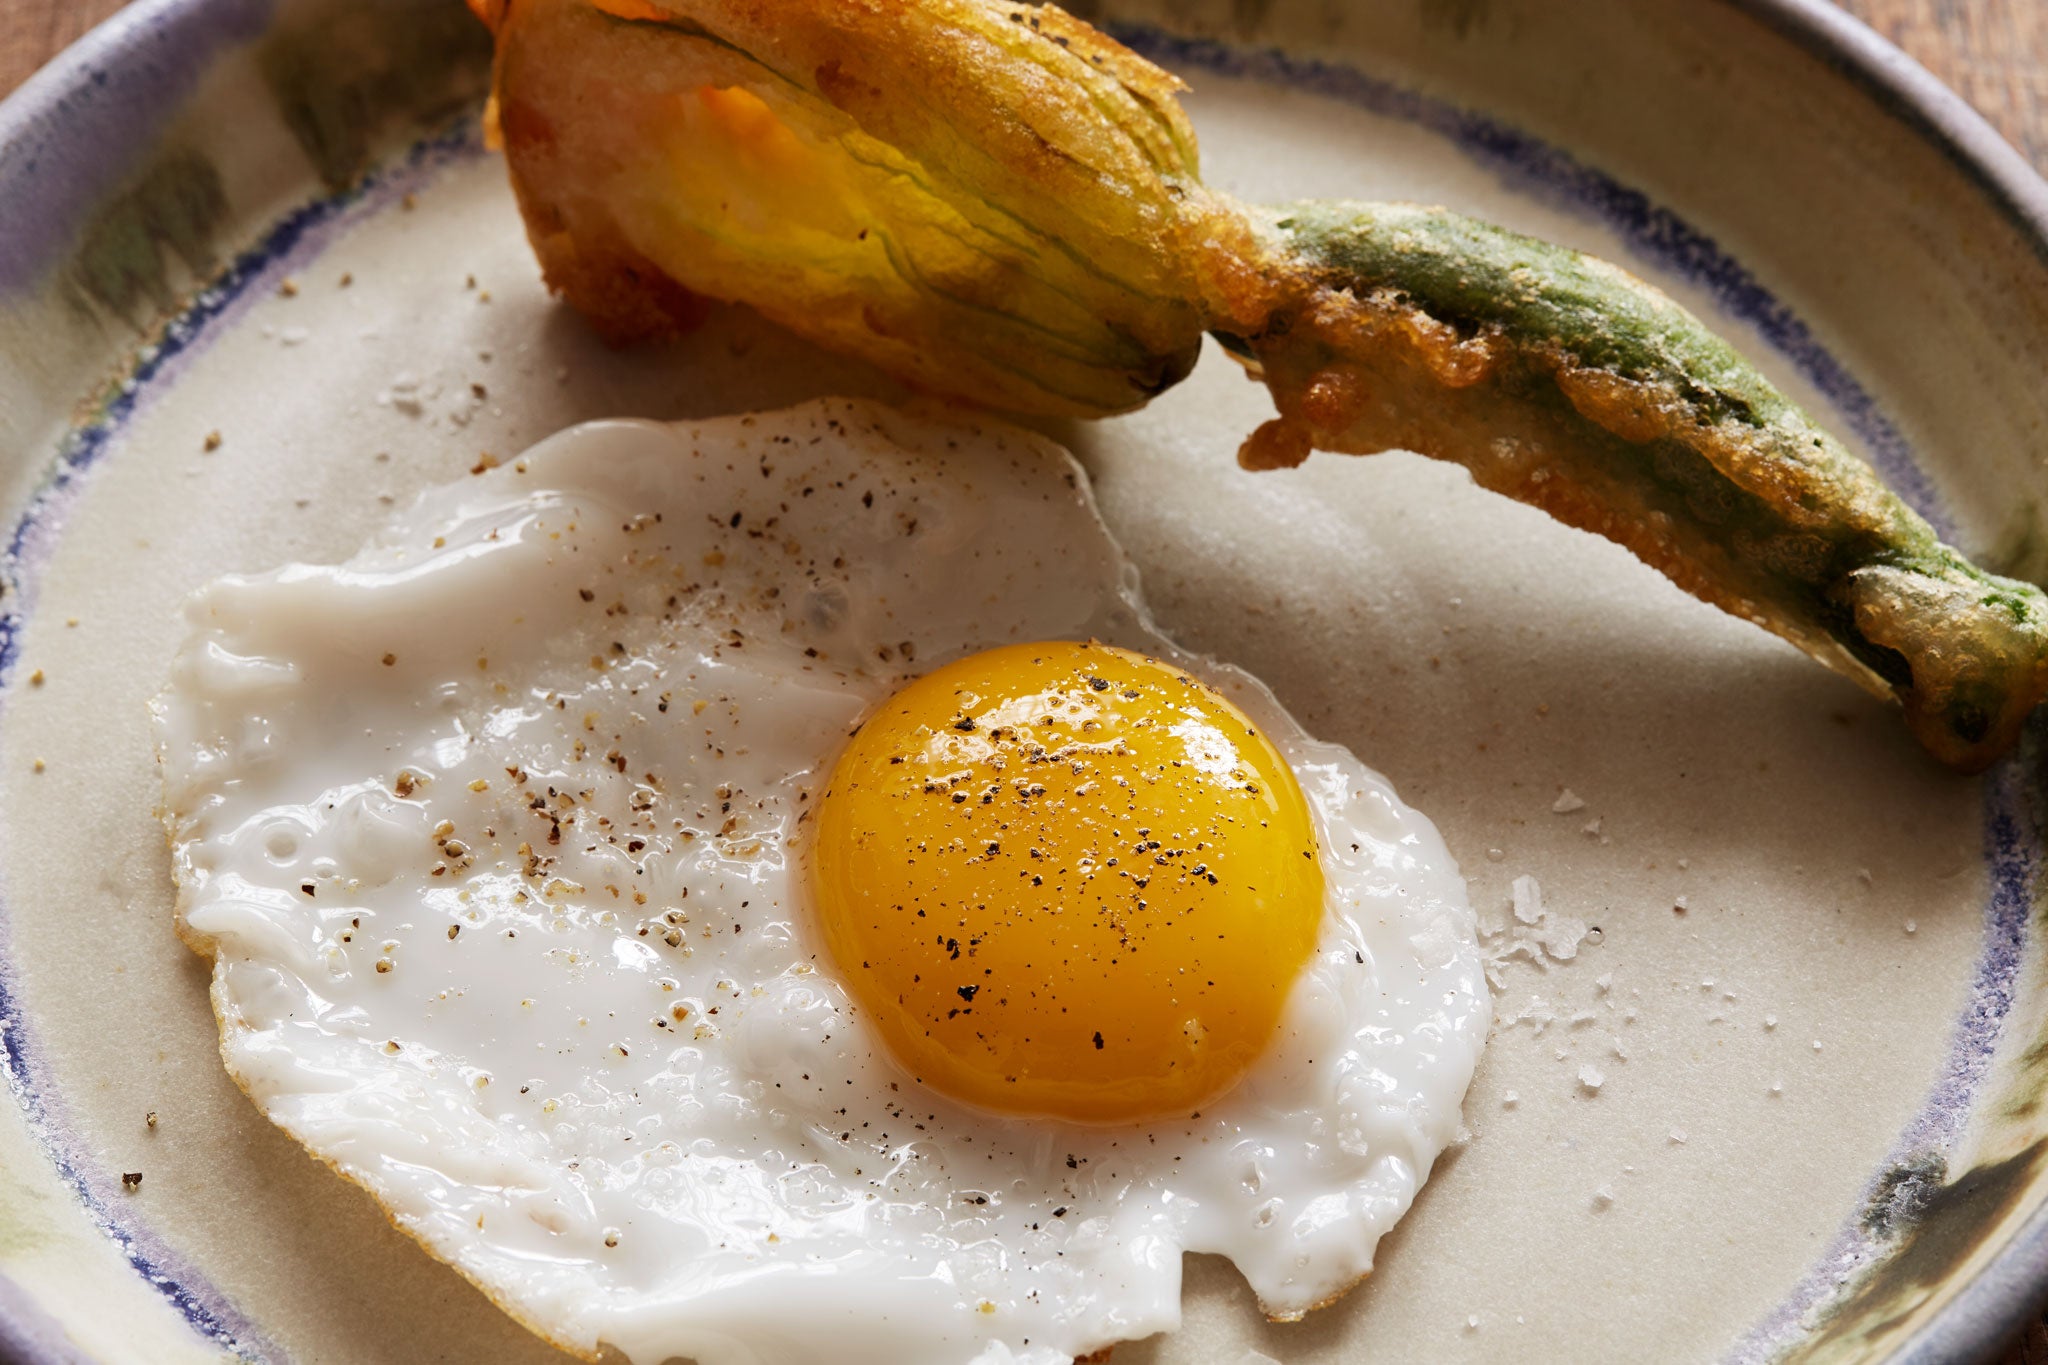 The crispness of the savoury-battered flower is great with a duck egg, creating a simple but luxurious breakfast offering